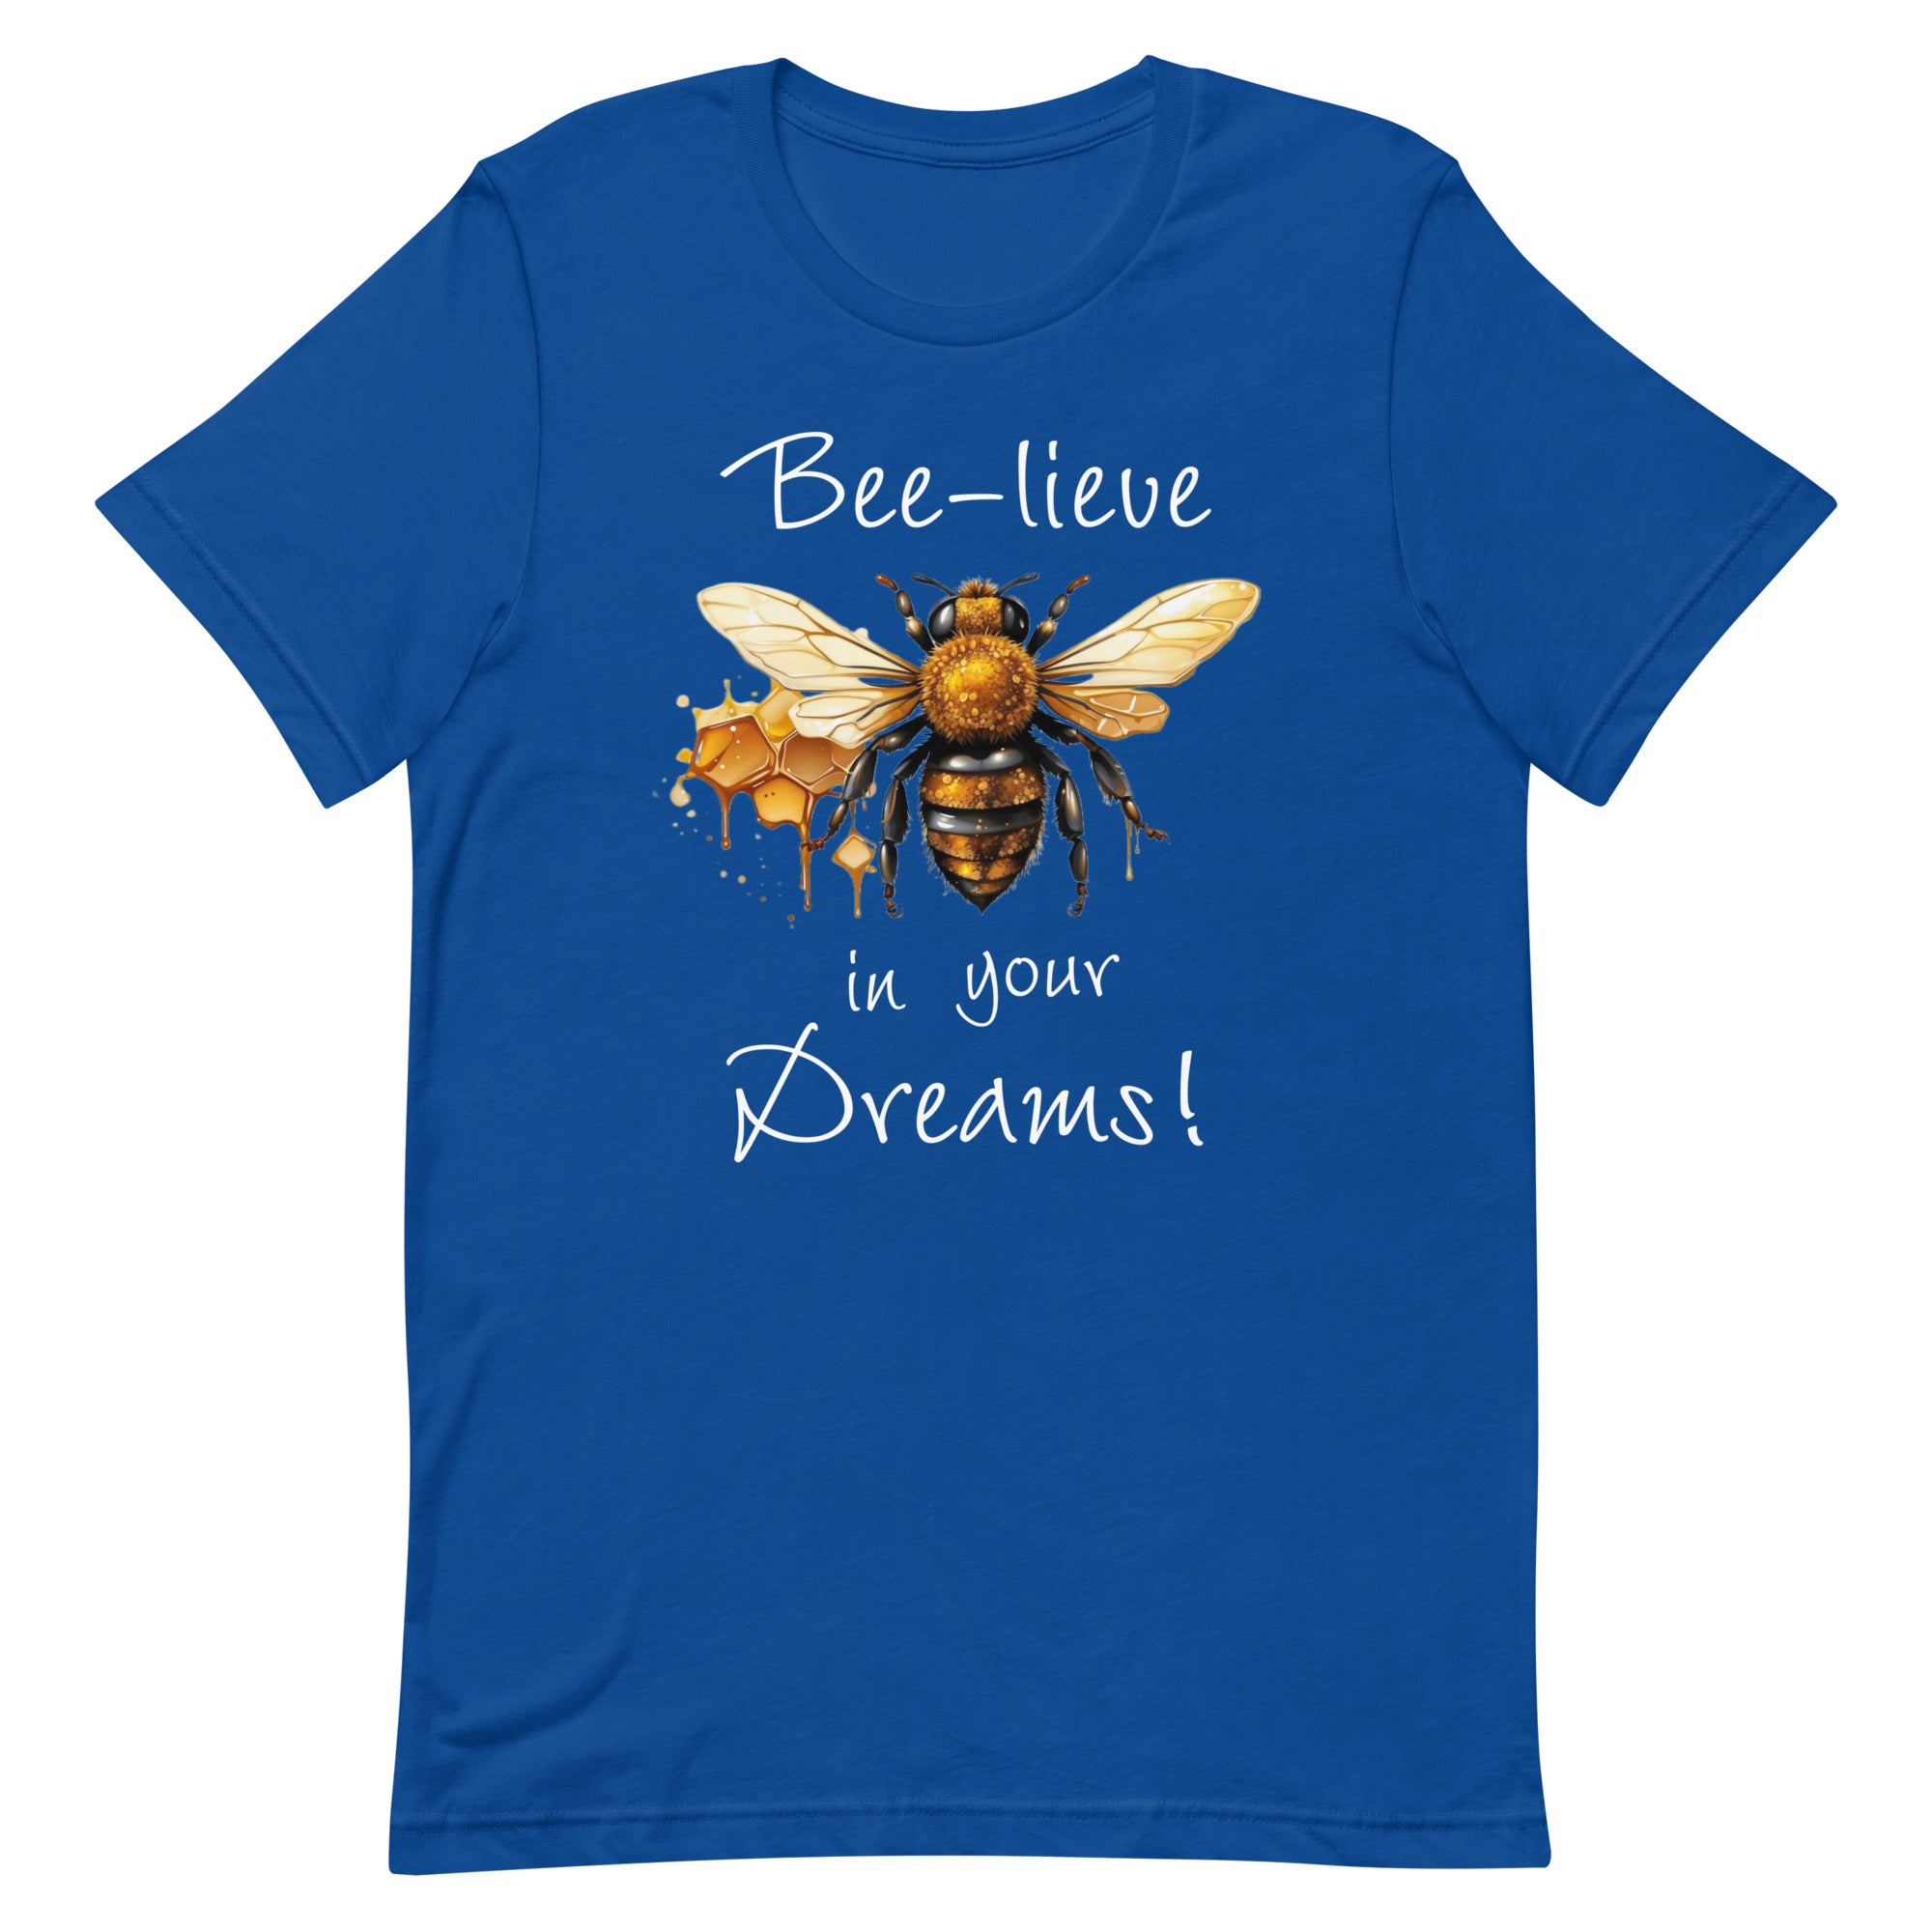 Bee-lieve in Your Dreams T-Shirt, Gift for Bee Lovers True Royal XL M S L DenBox